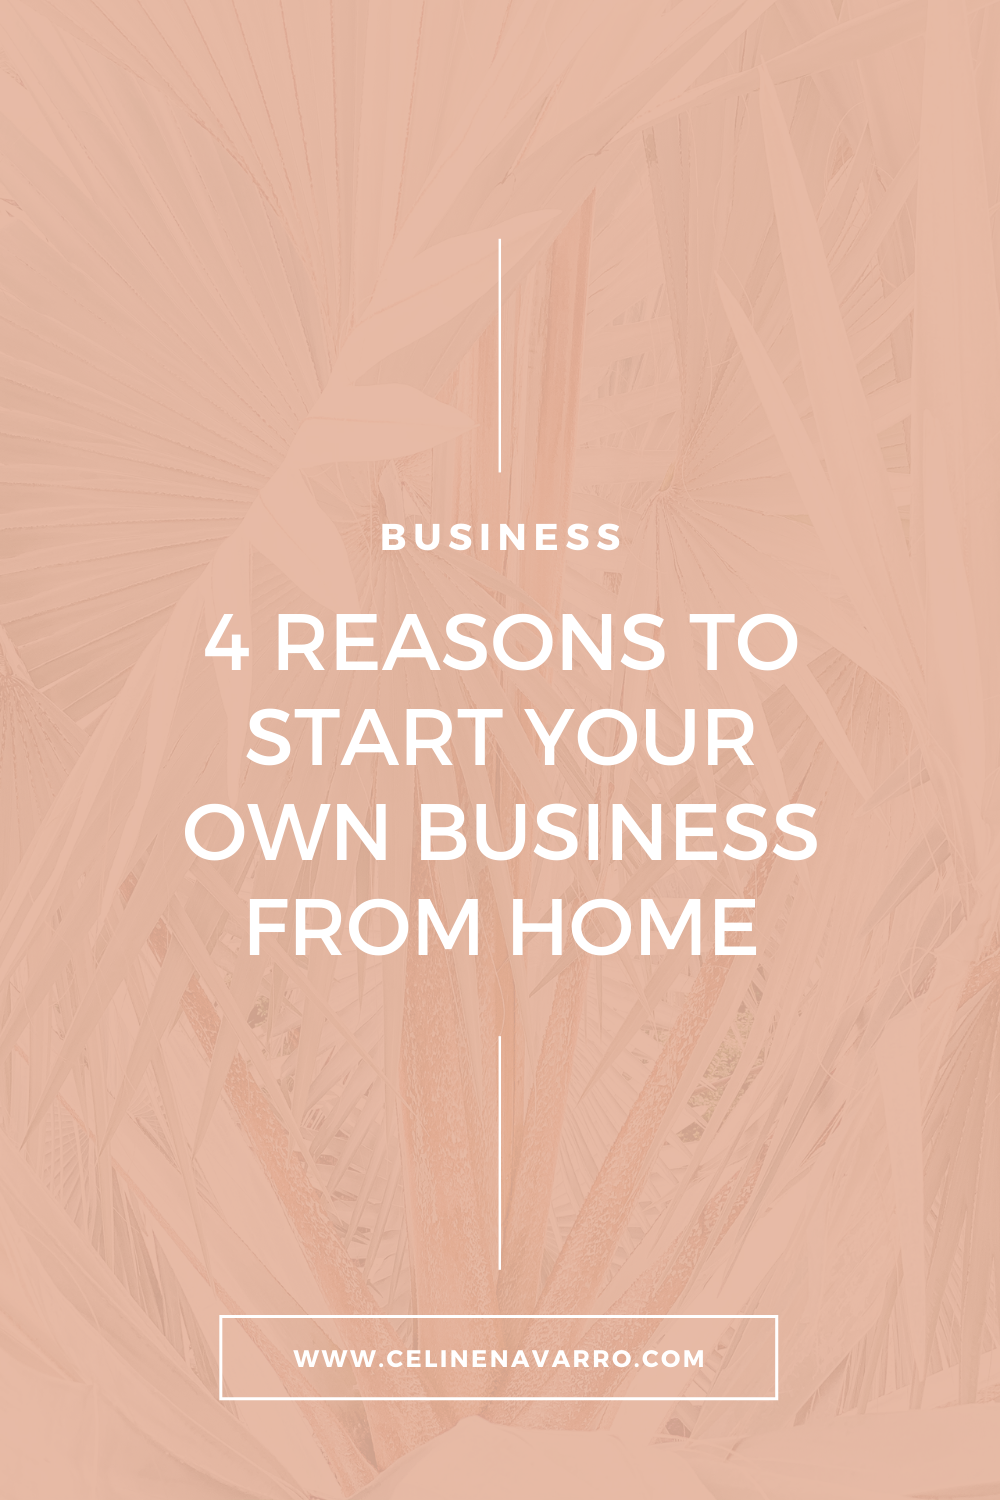 4 REASONS TO START YOUR OWN BUSINESS FROM HOME